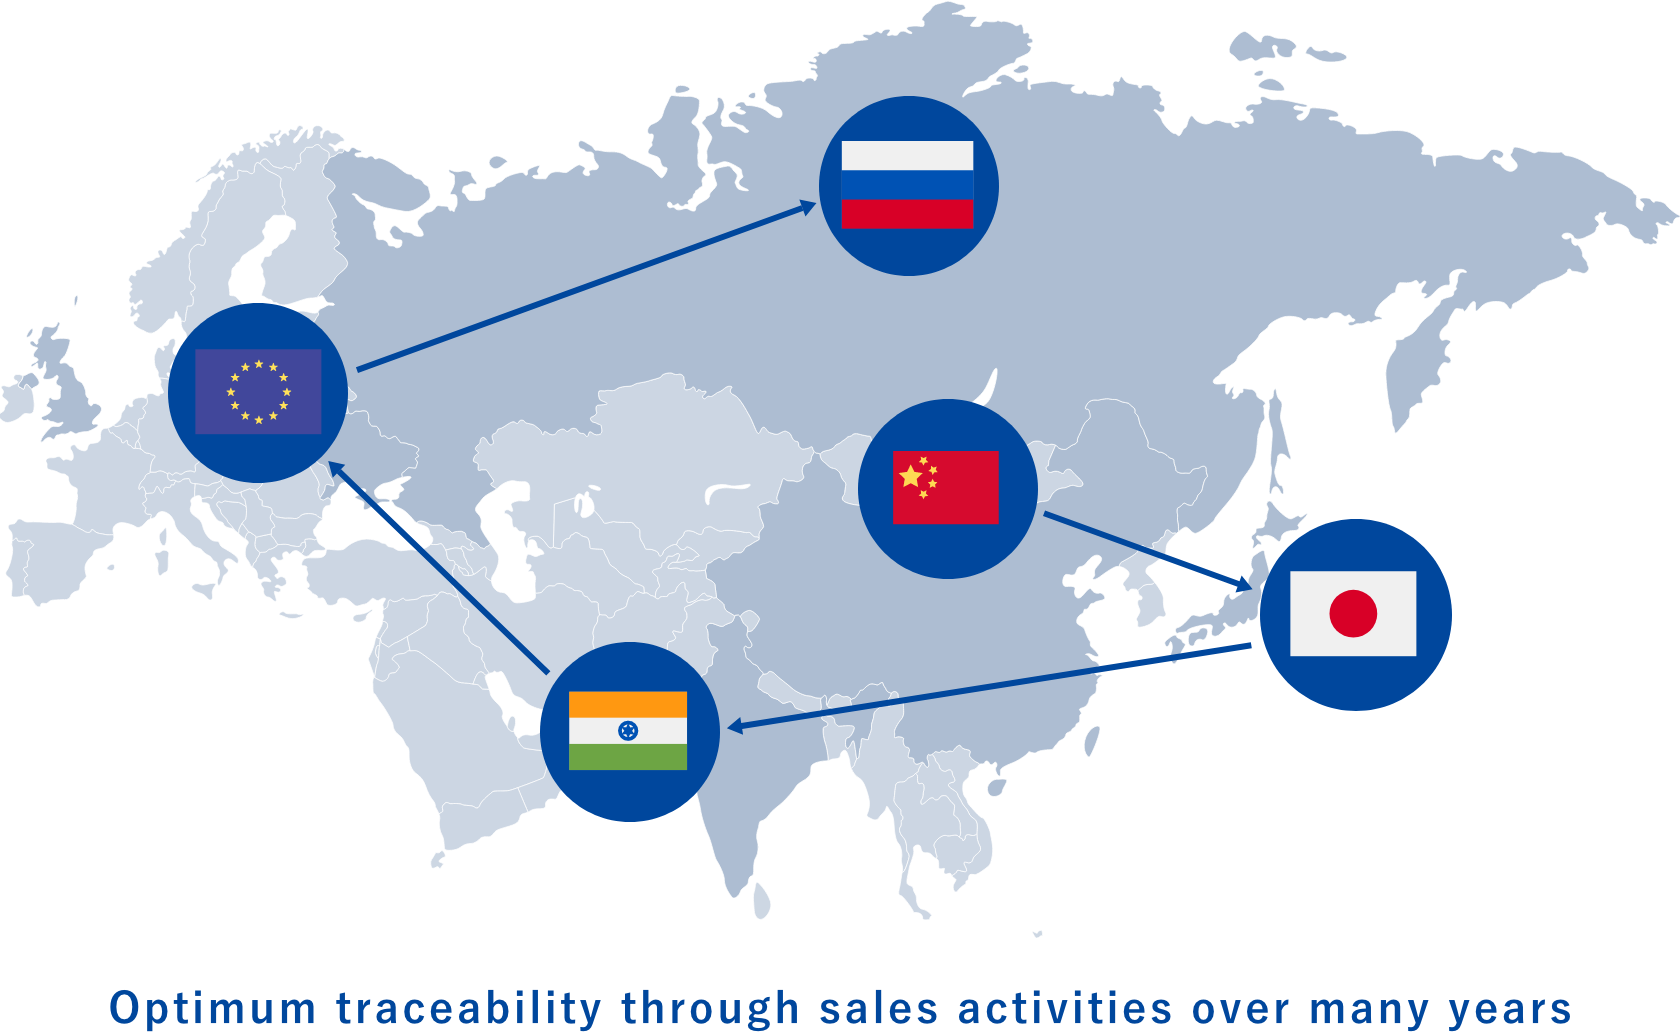 Optimum traceability through sales activities over many years